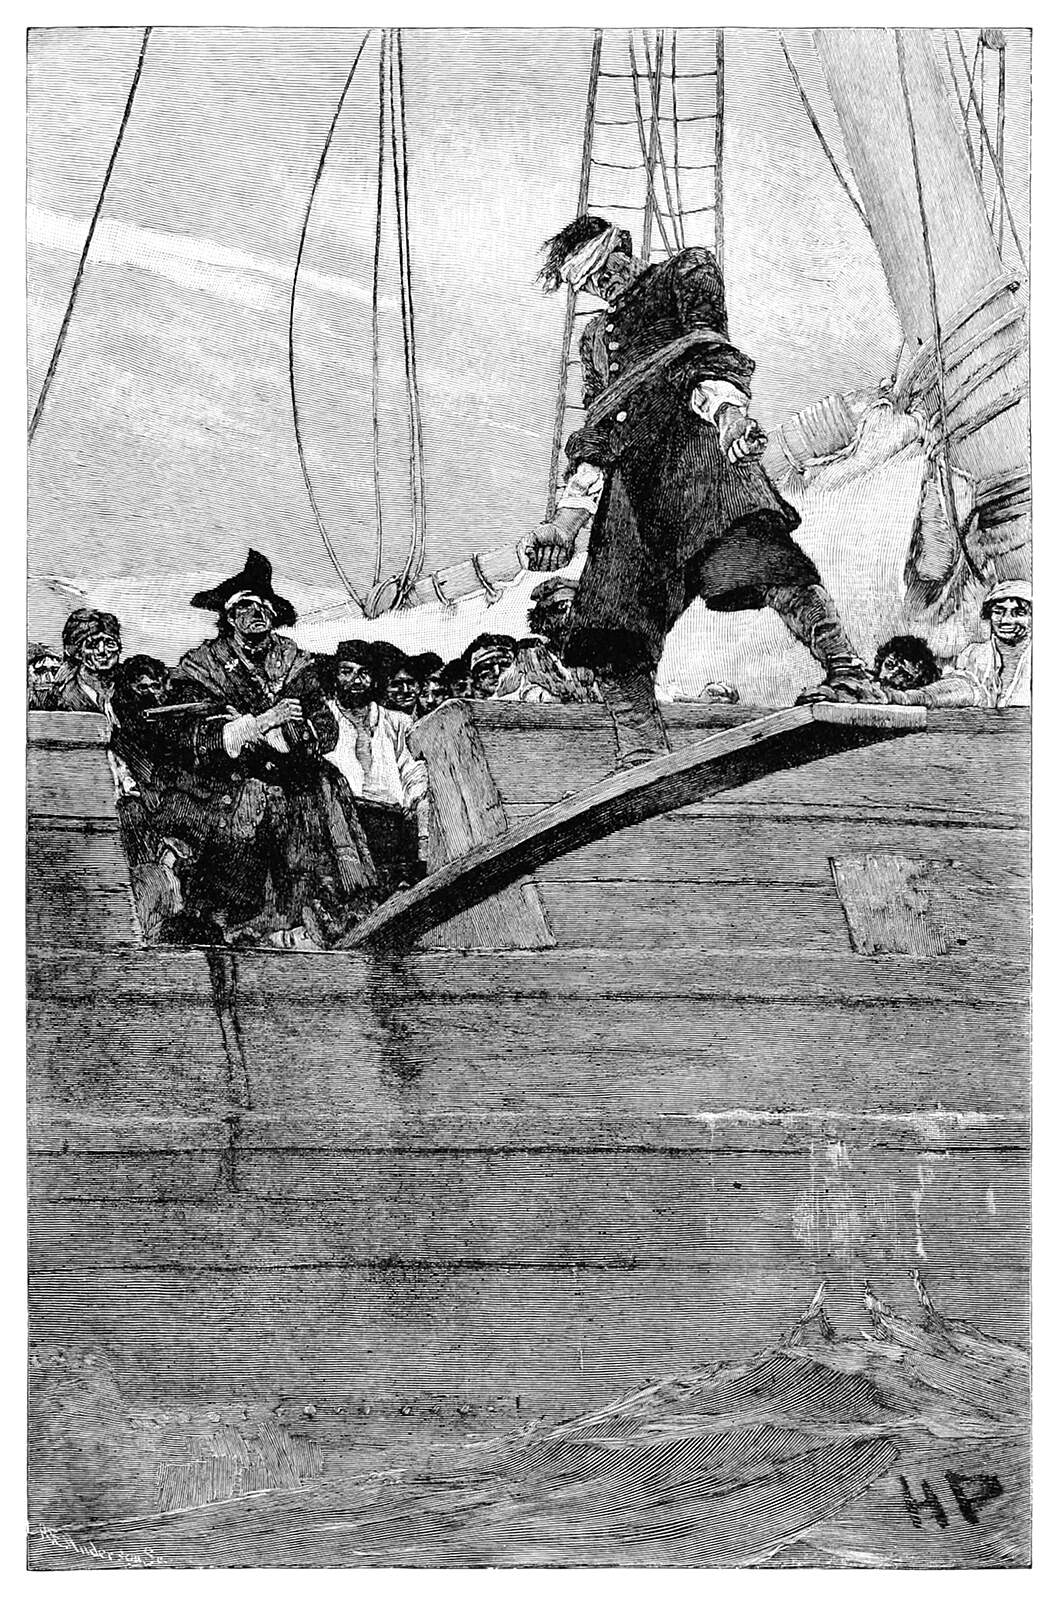 A man is pushed off a gangplank